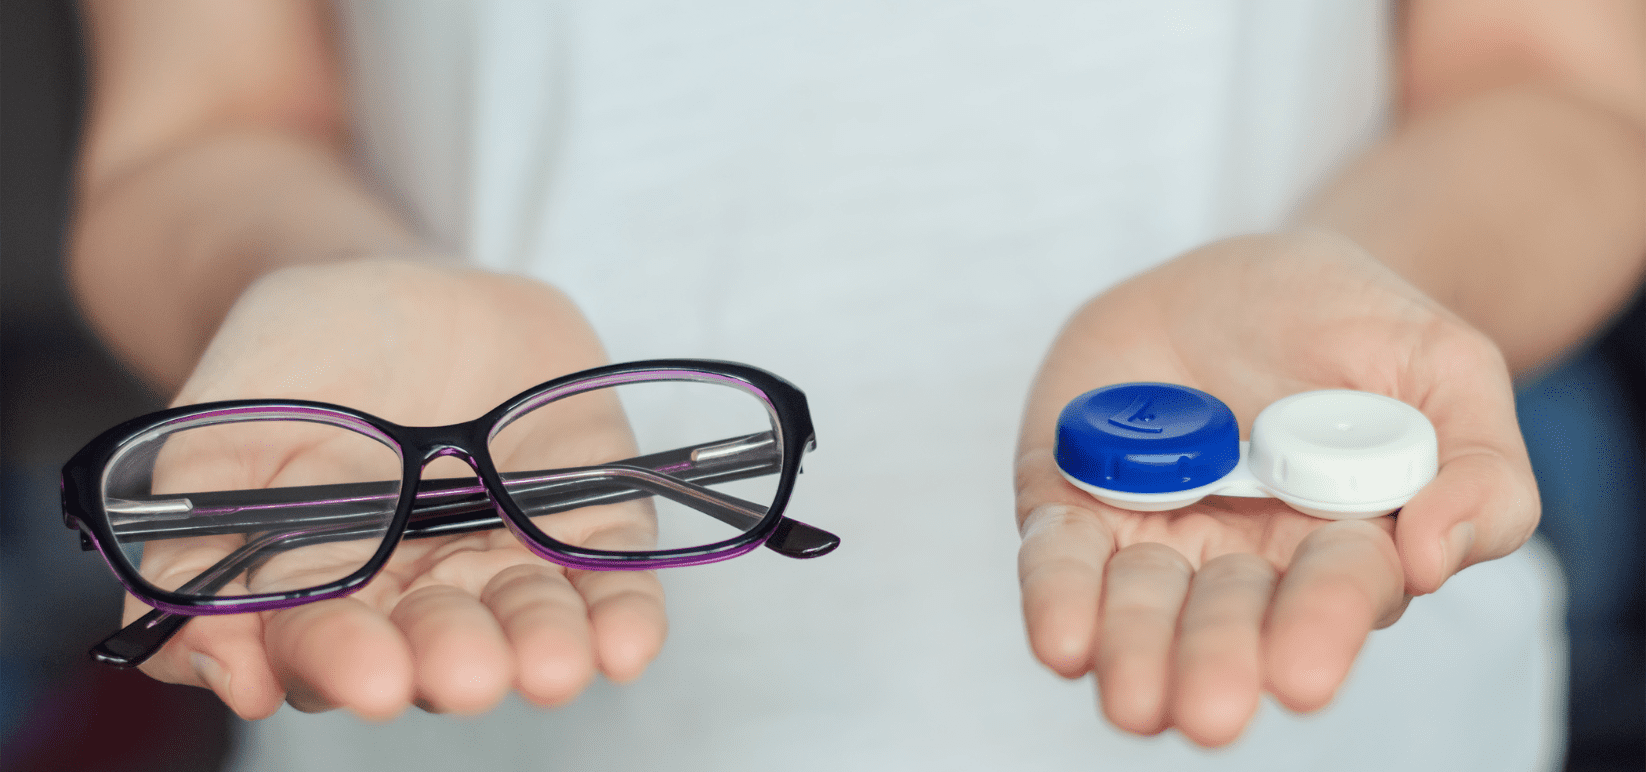 In one had a person hold a pair of eyeglasses, in the other the person holds the container for contact lenses